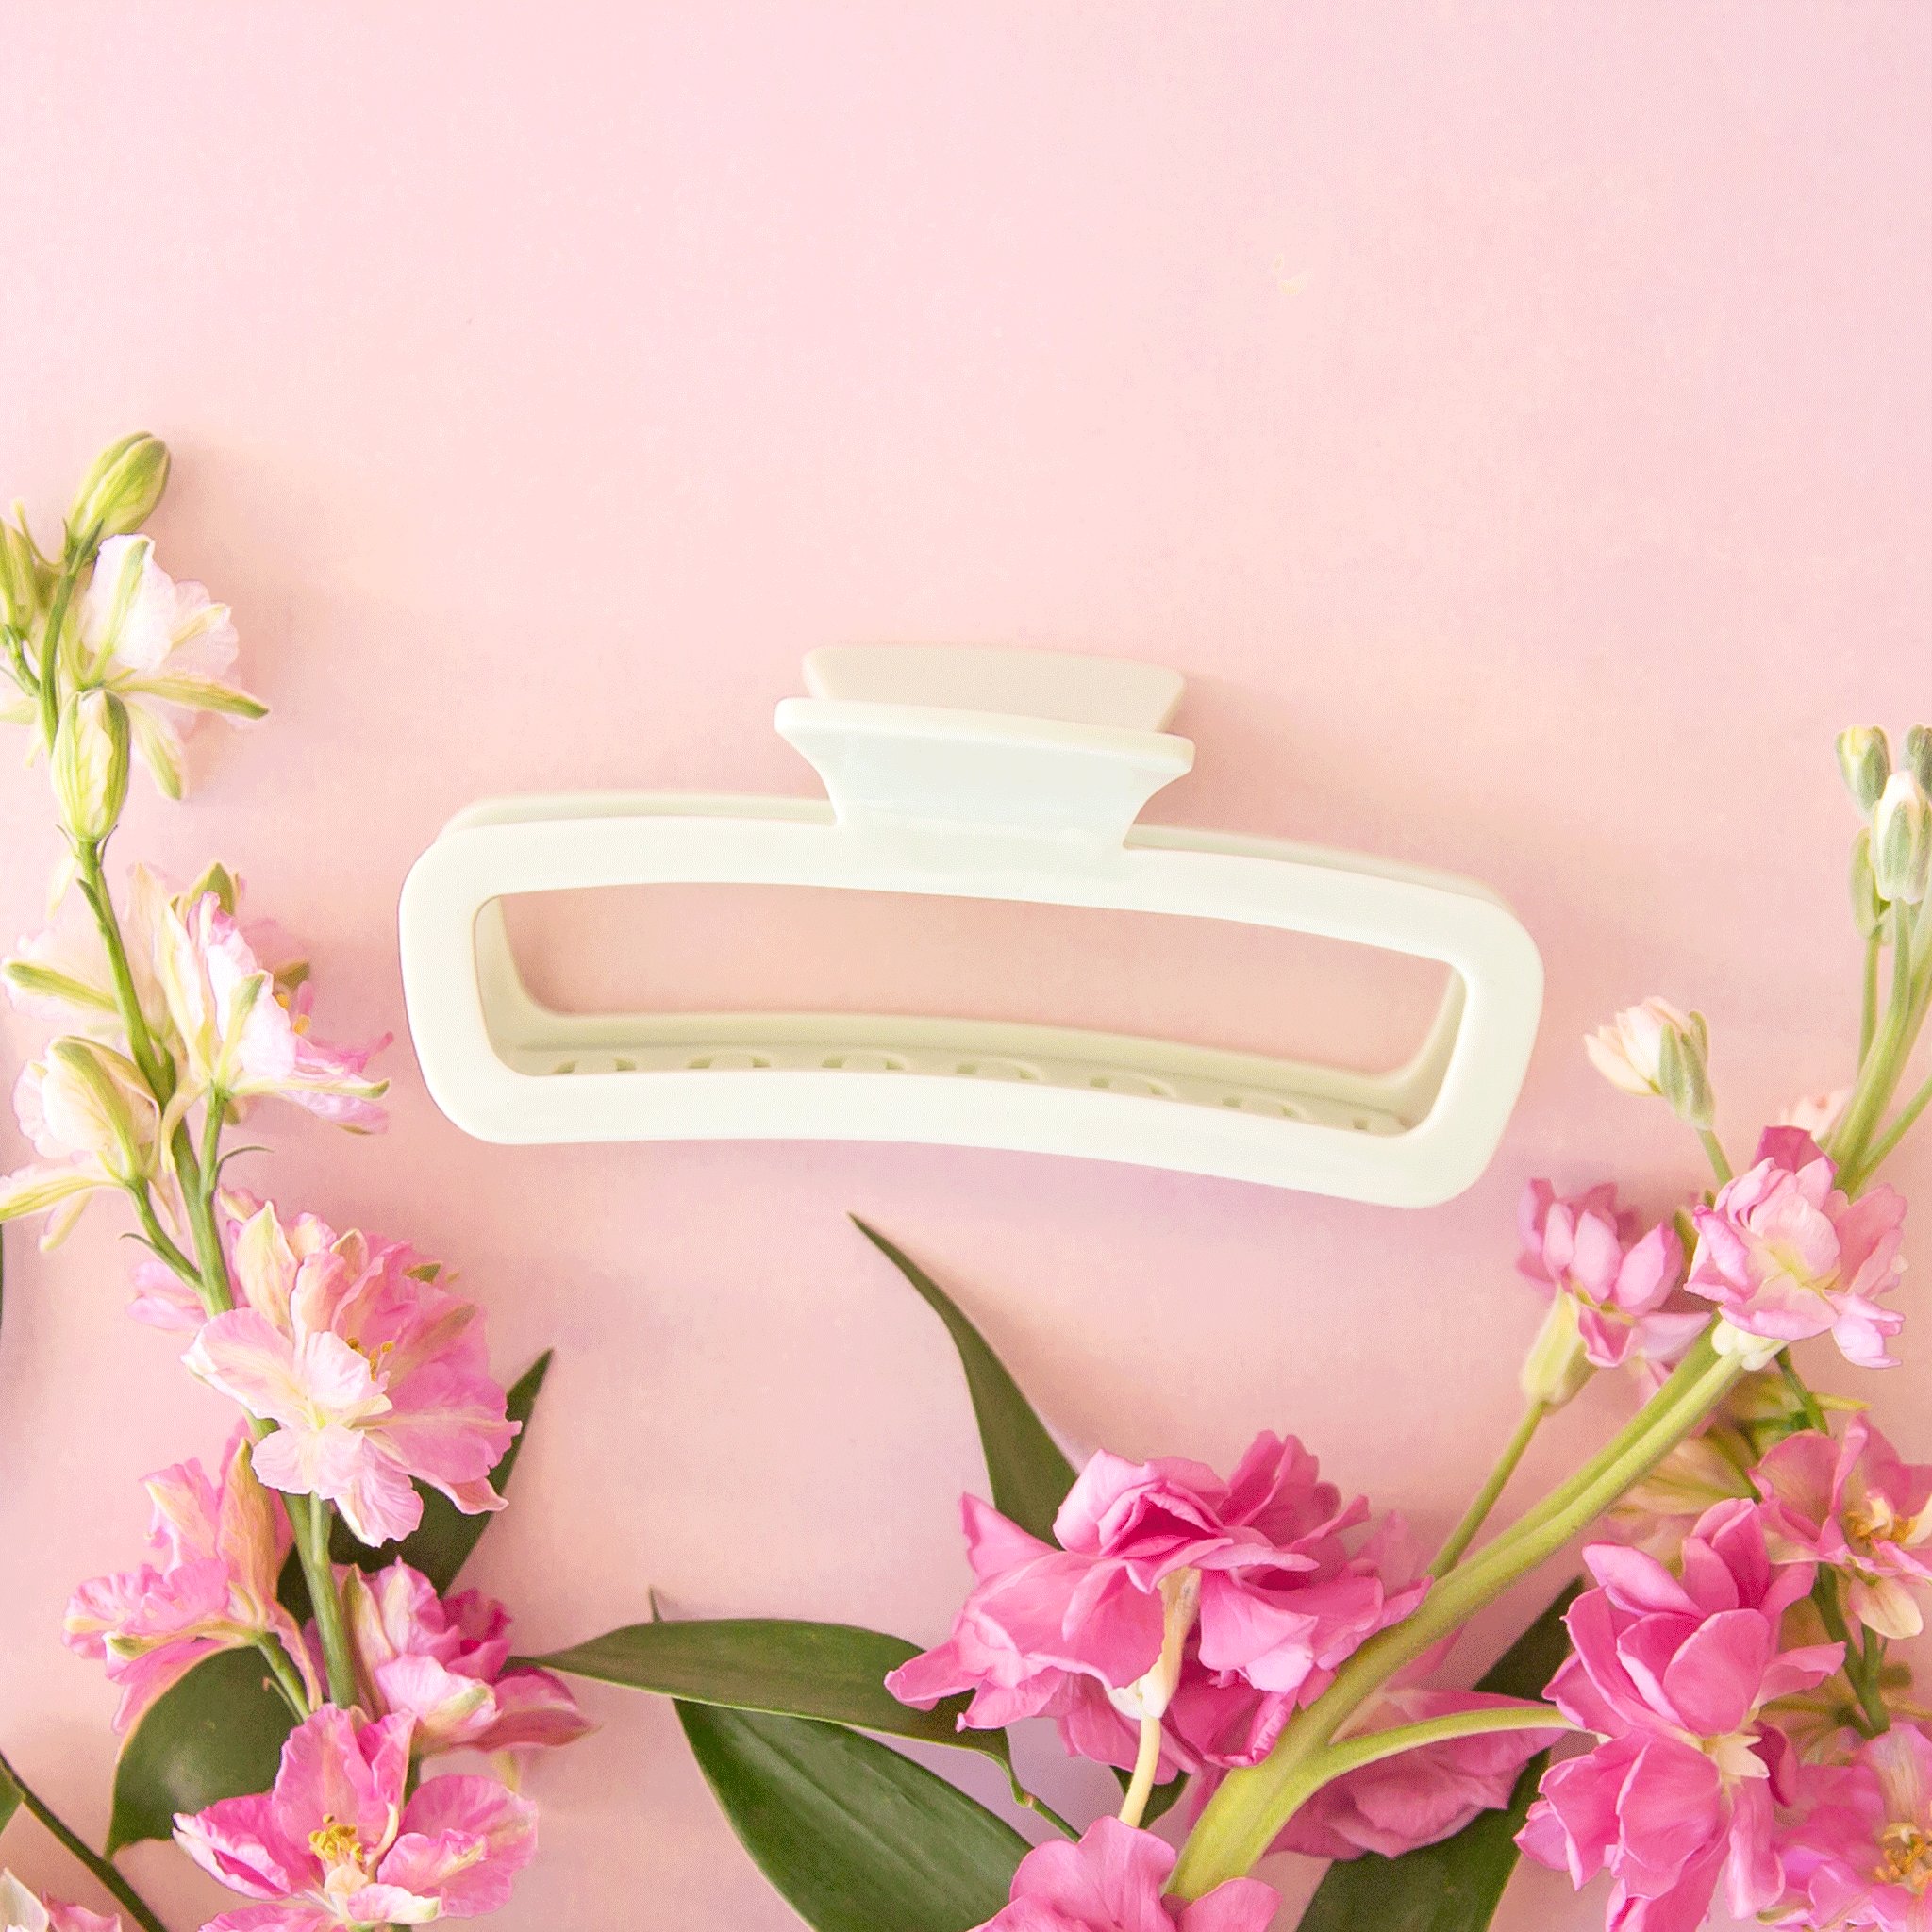 On a pink background is a rounded rectangle hair claw clip in mint green shade.